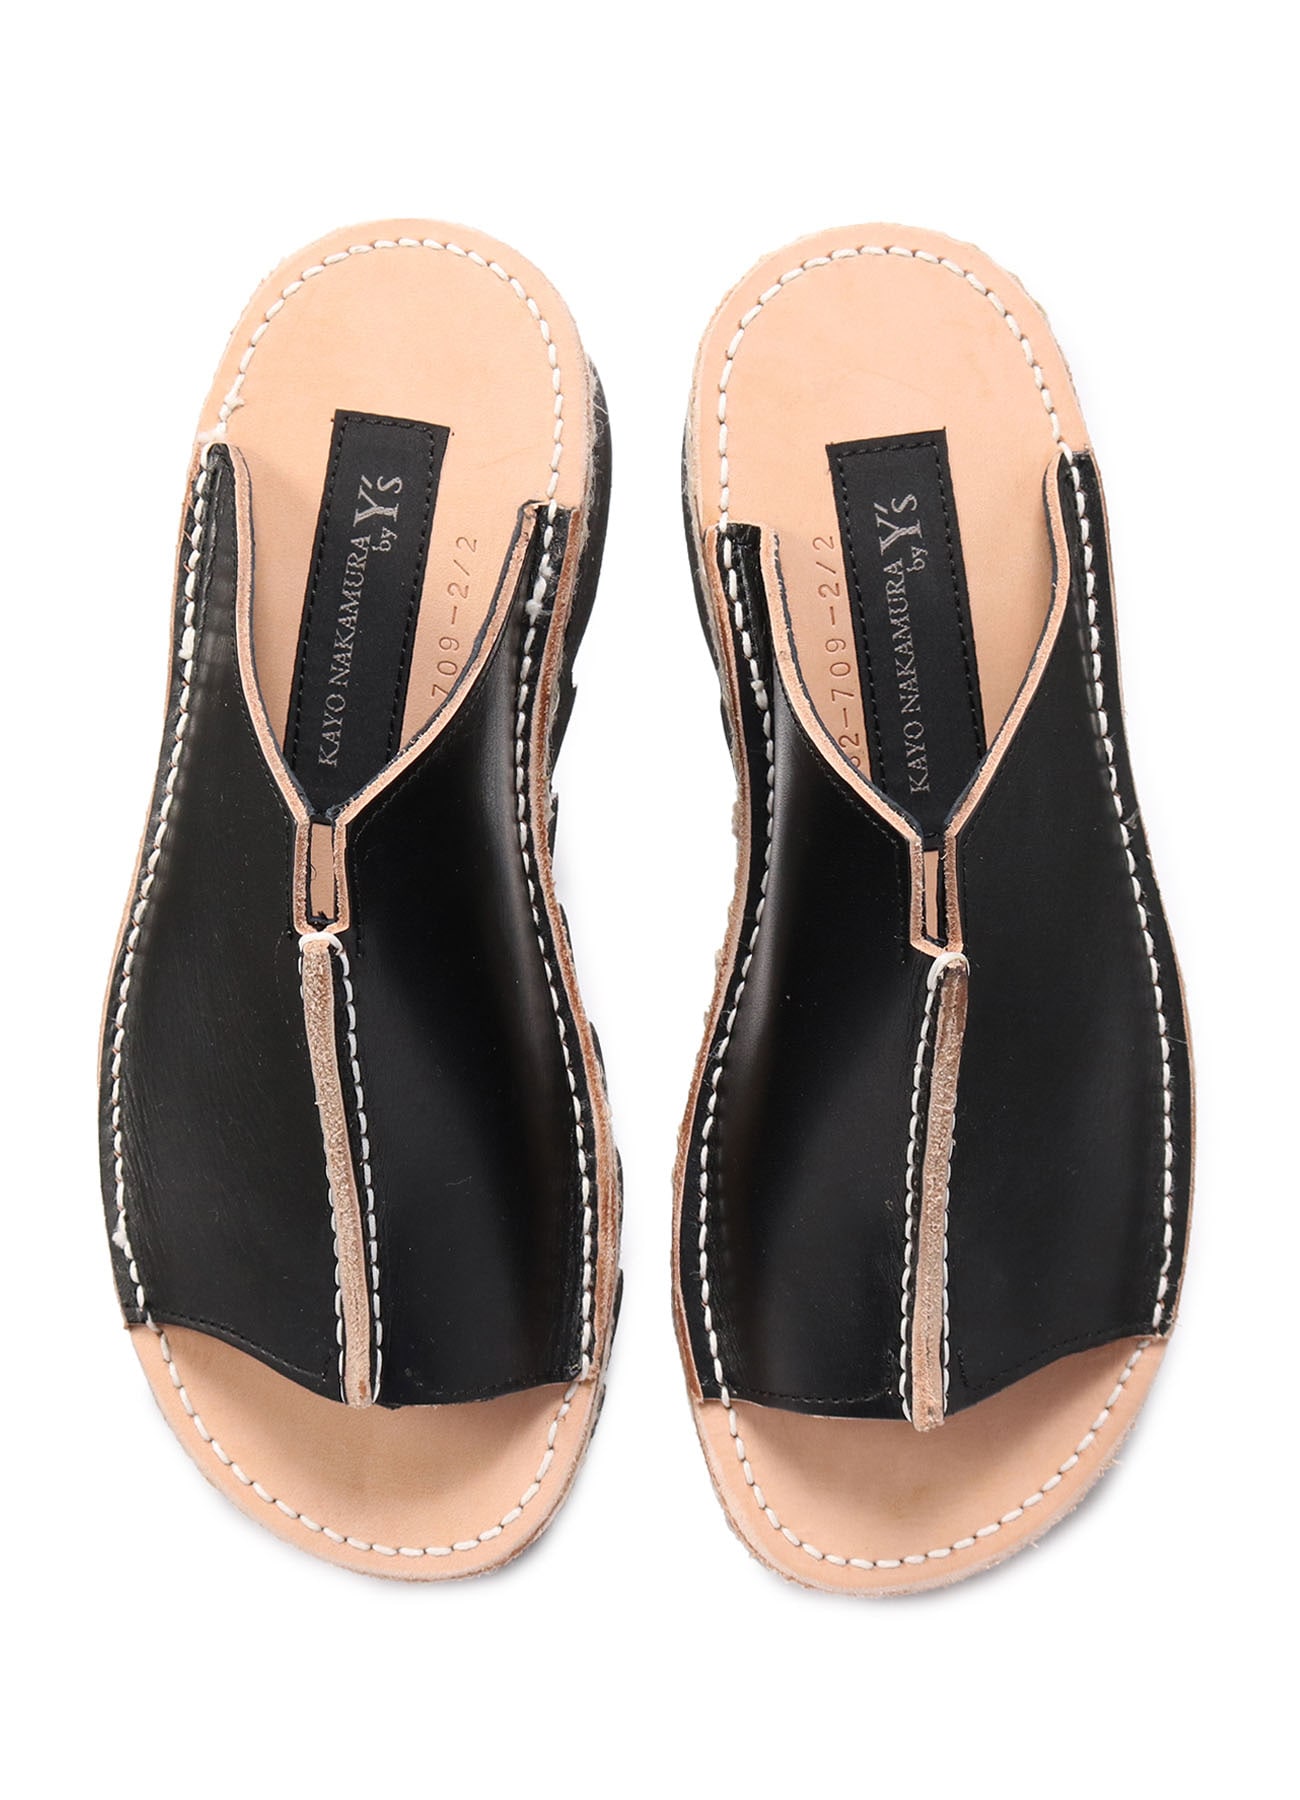 THICH NUME LEATHER B CENTER CONNECTED SANDALS